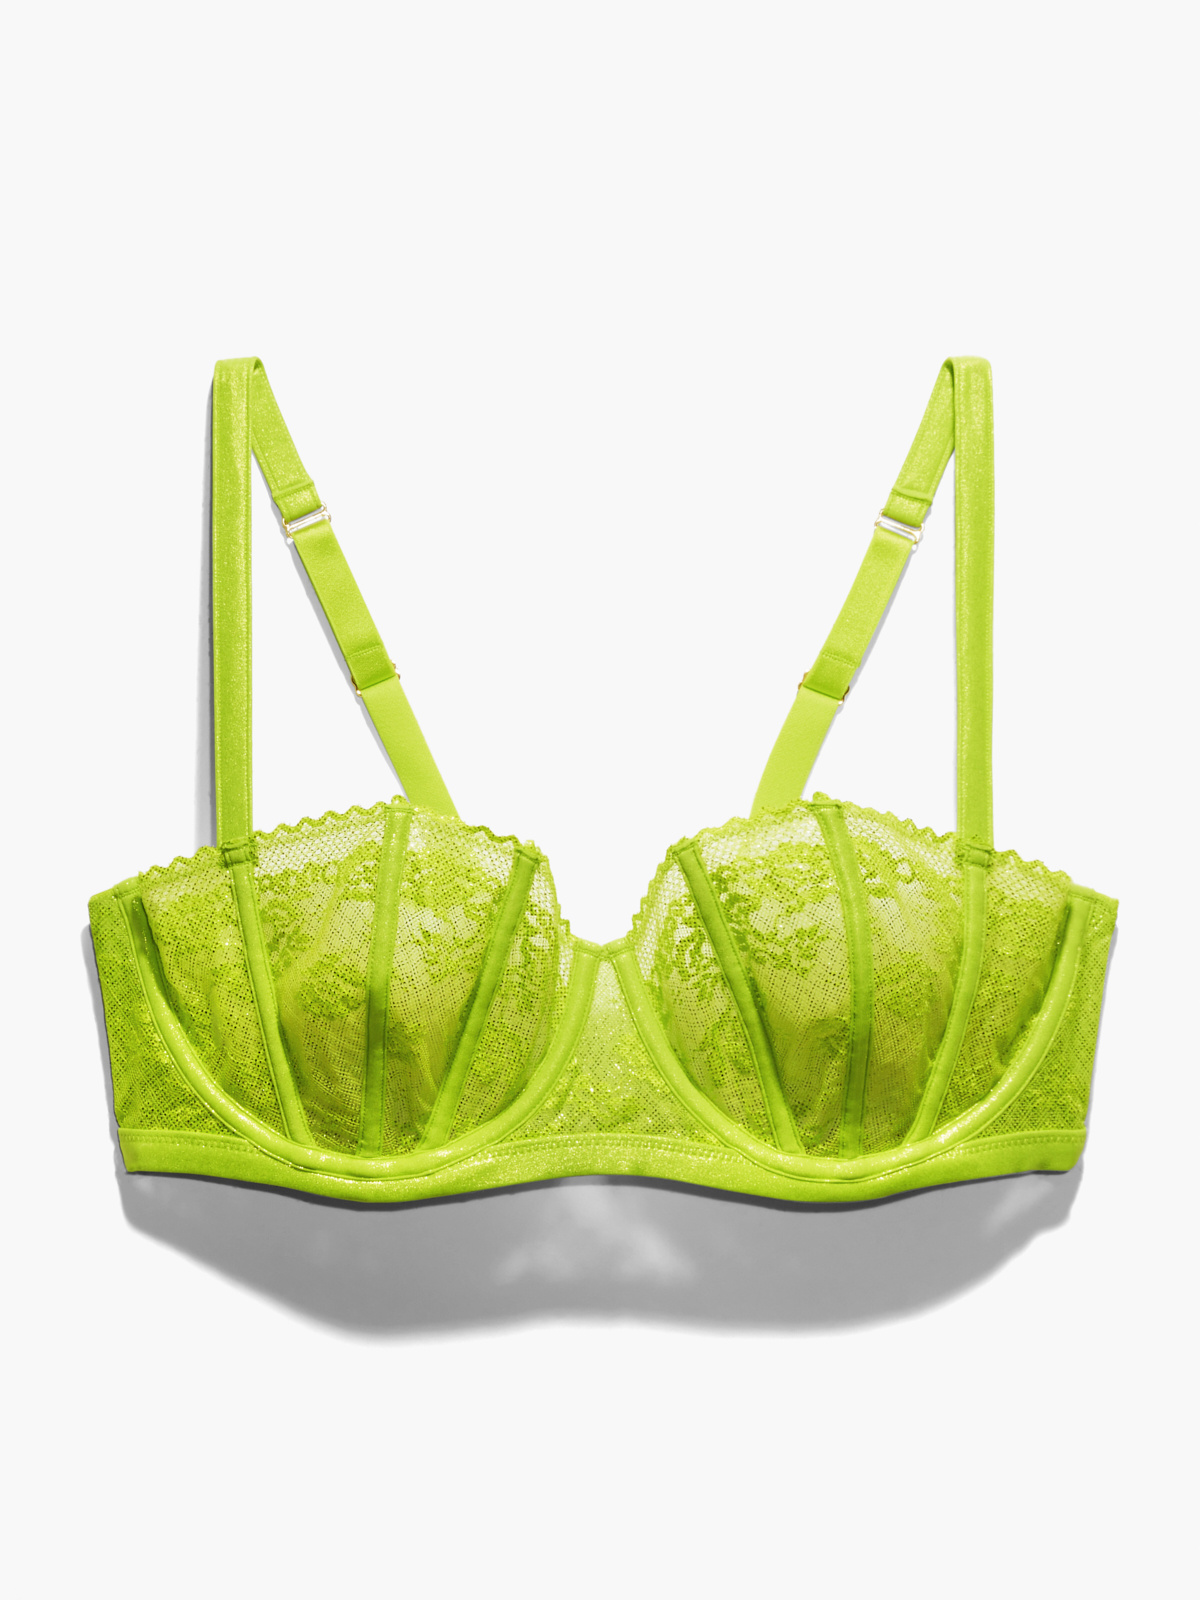 https://cdn.savagex.com/media/images/products/BA2148617-3106/CAGED-LACE-UNLINED-BALCONETTE-BRA-BA2148617-3106-LAYDOWN-1200x1600.jpg